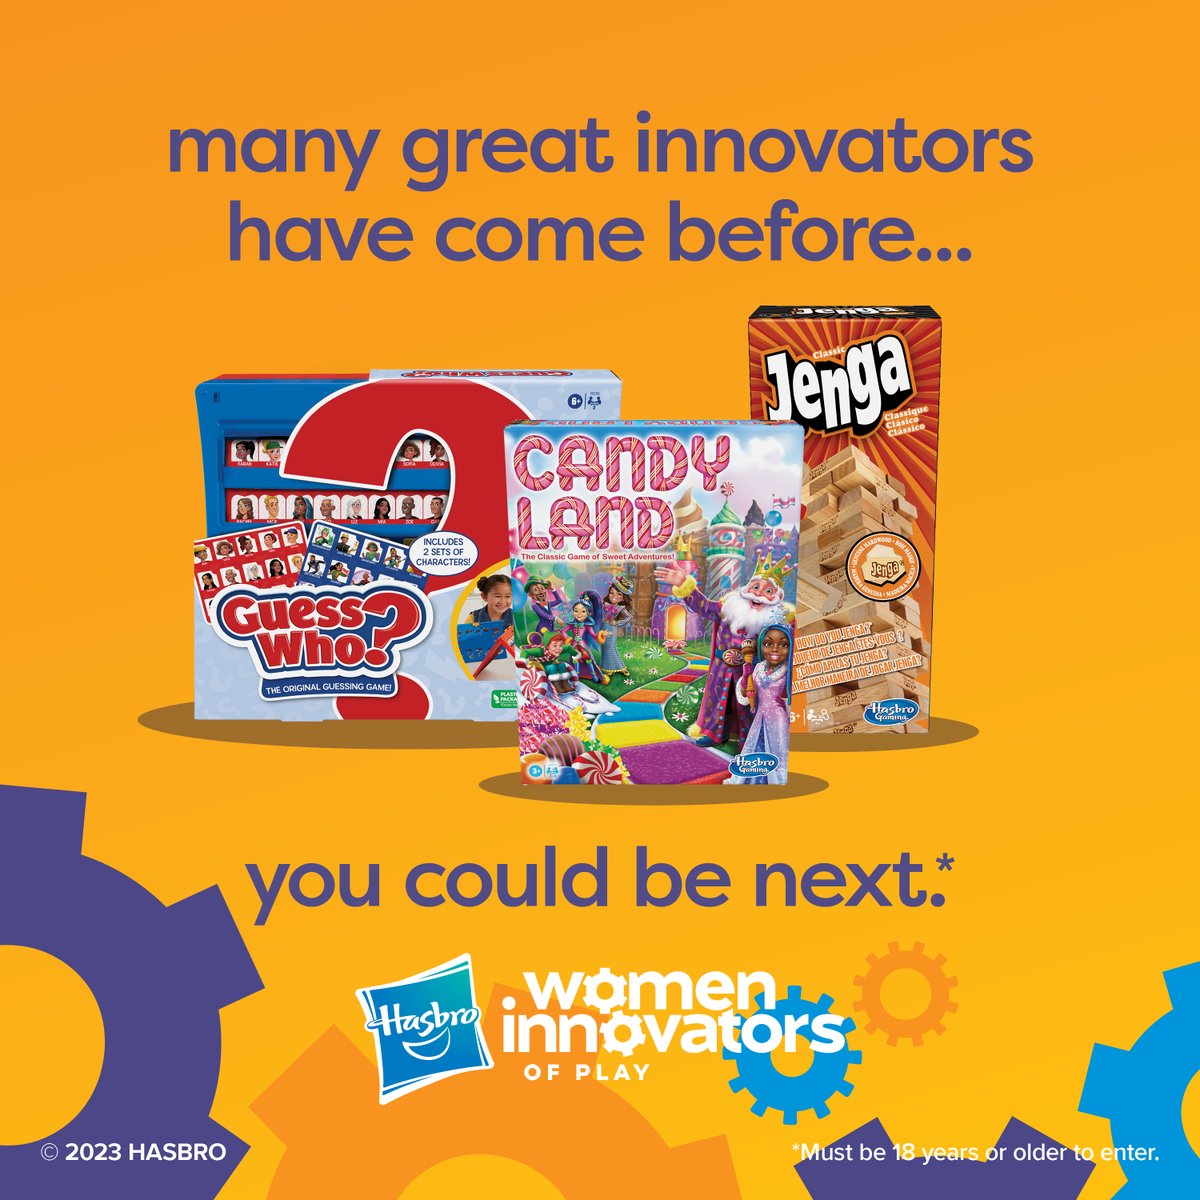 Hasbro presents the first-ever #WomenInnovatorsofPlay Challenge – a global open call for visionary women like you!  Submit your groundbreaking toy and game ideas. Show us what you've got!  

spark.hasbro.com/womeninnovators